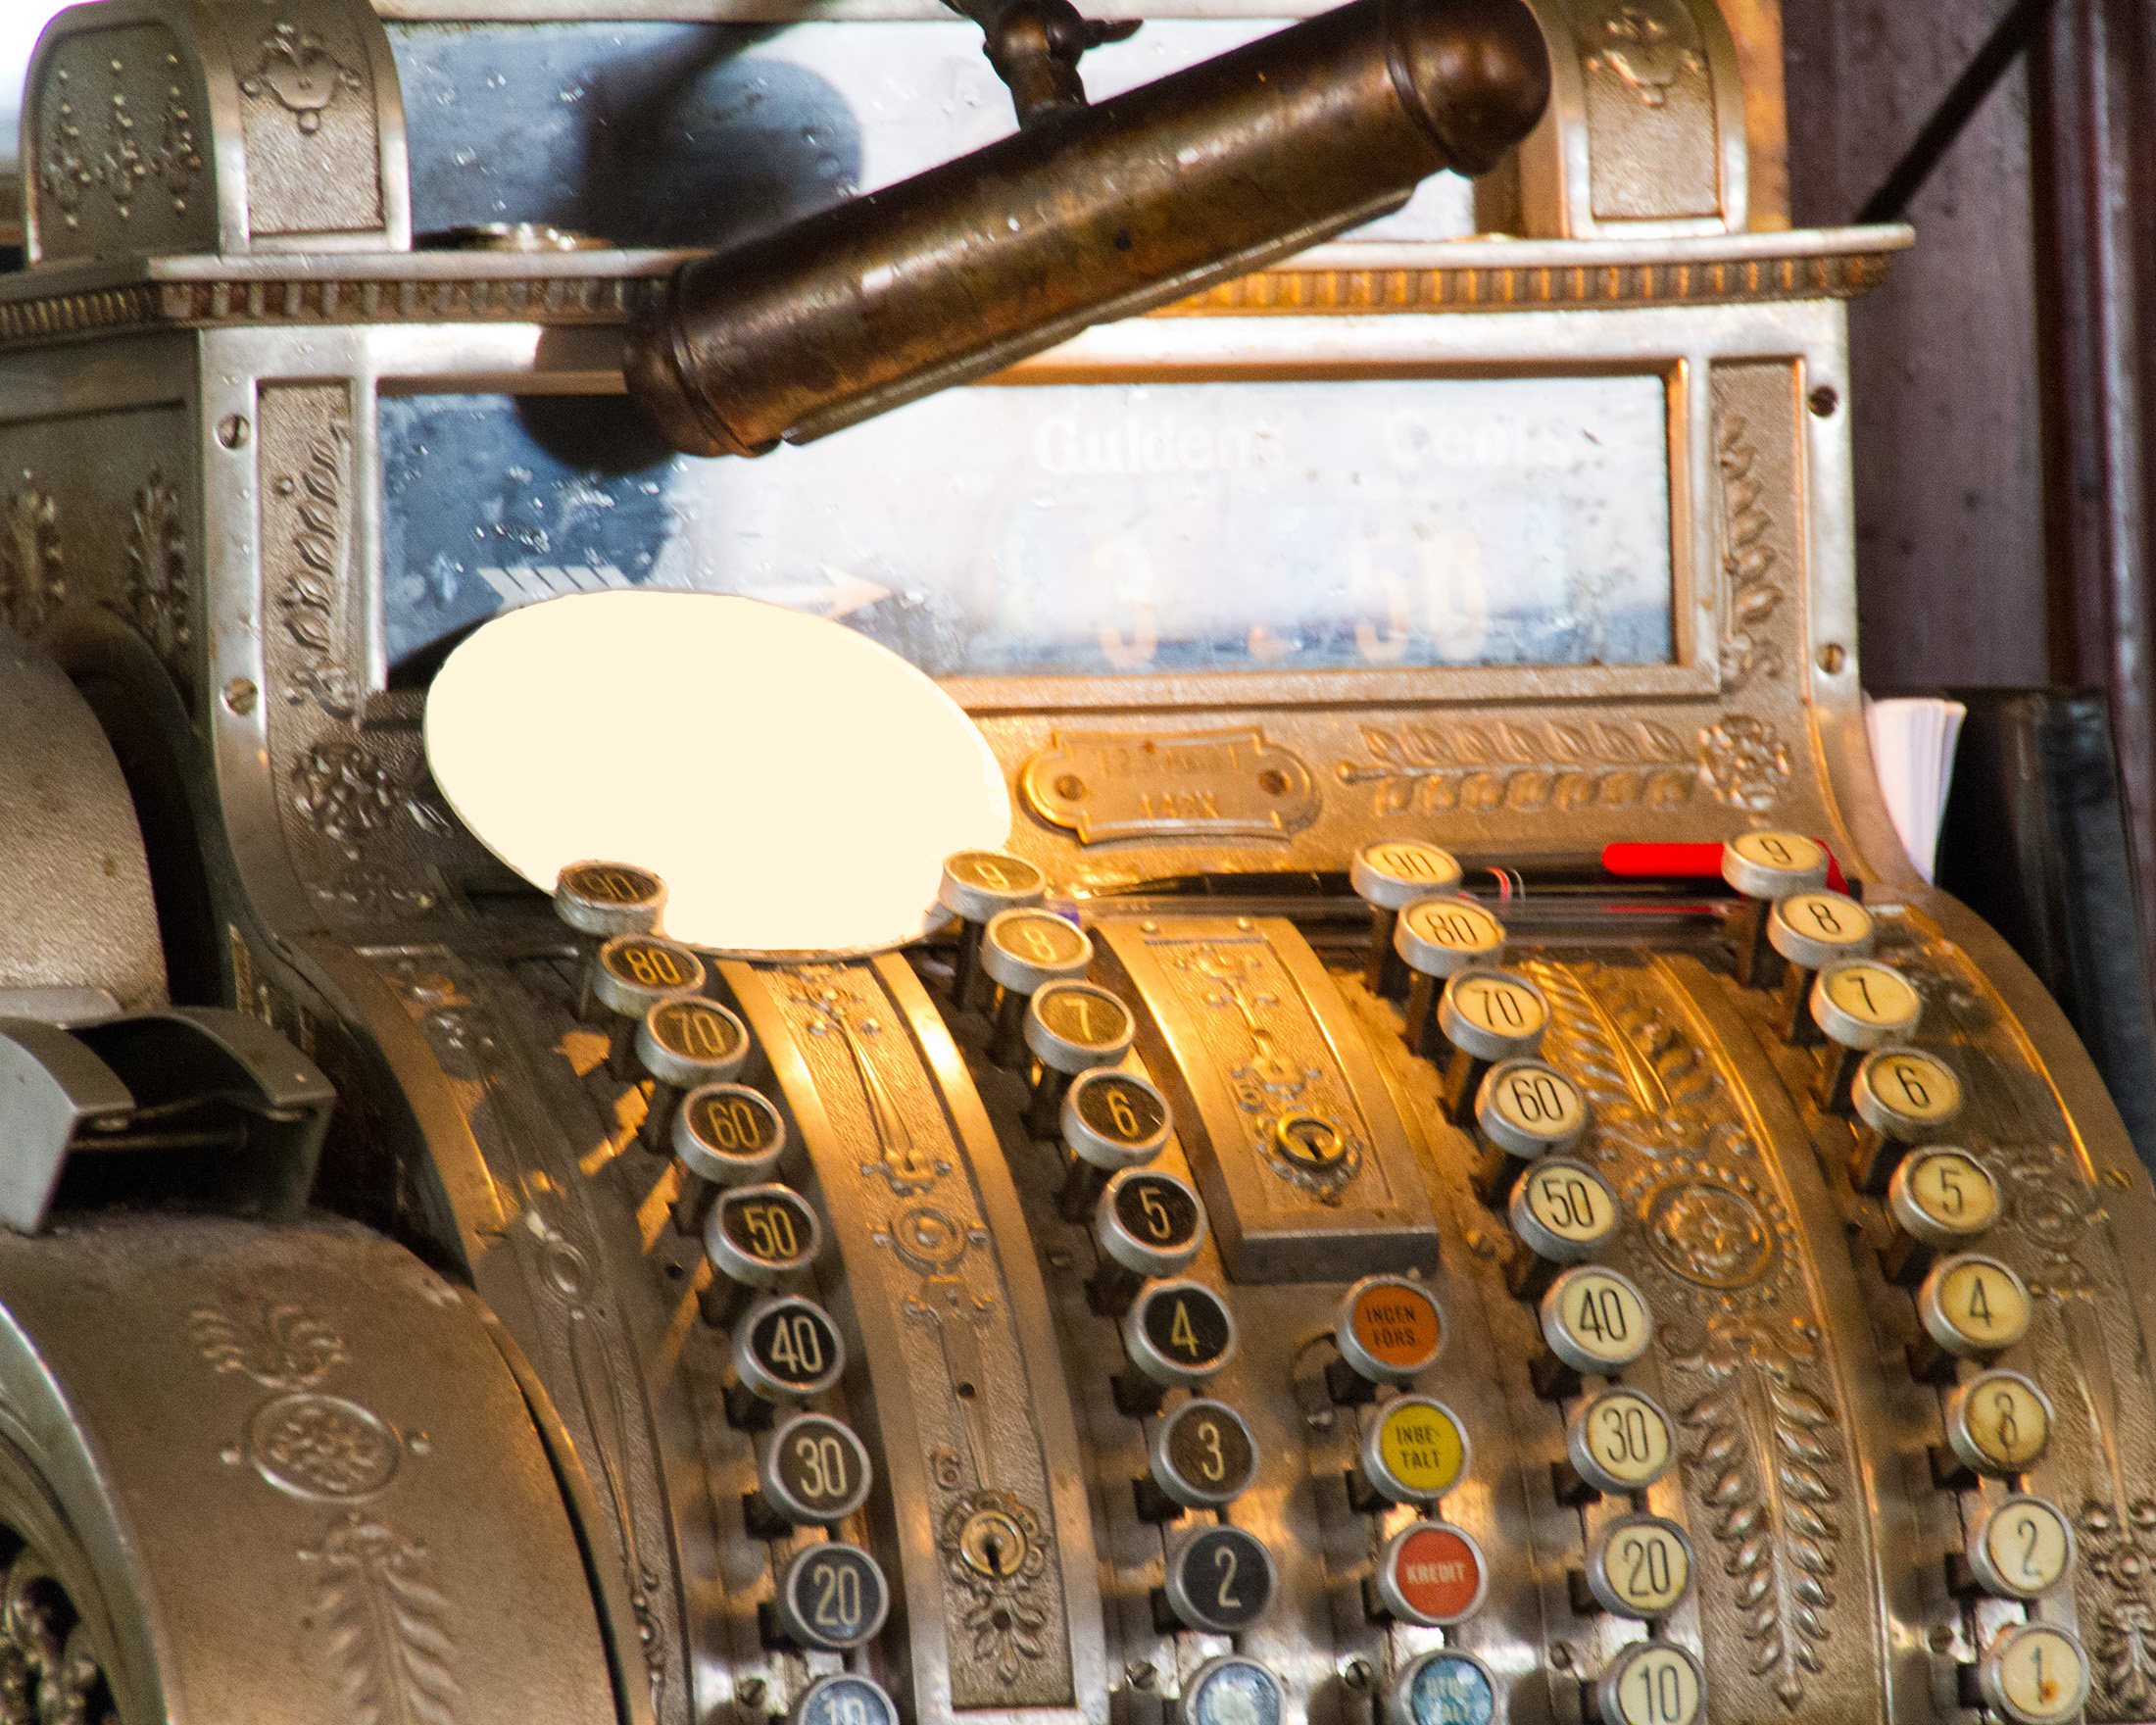 Free photo: Cash register - Accounting, Old, Ornate - Free Download ...